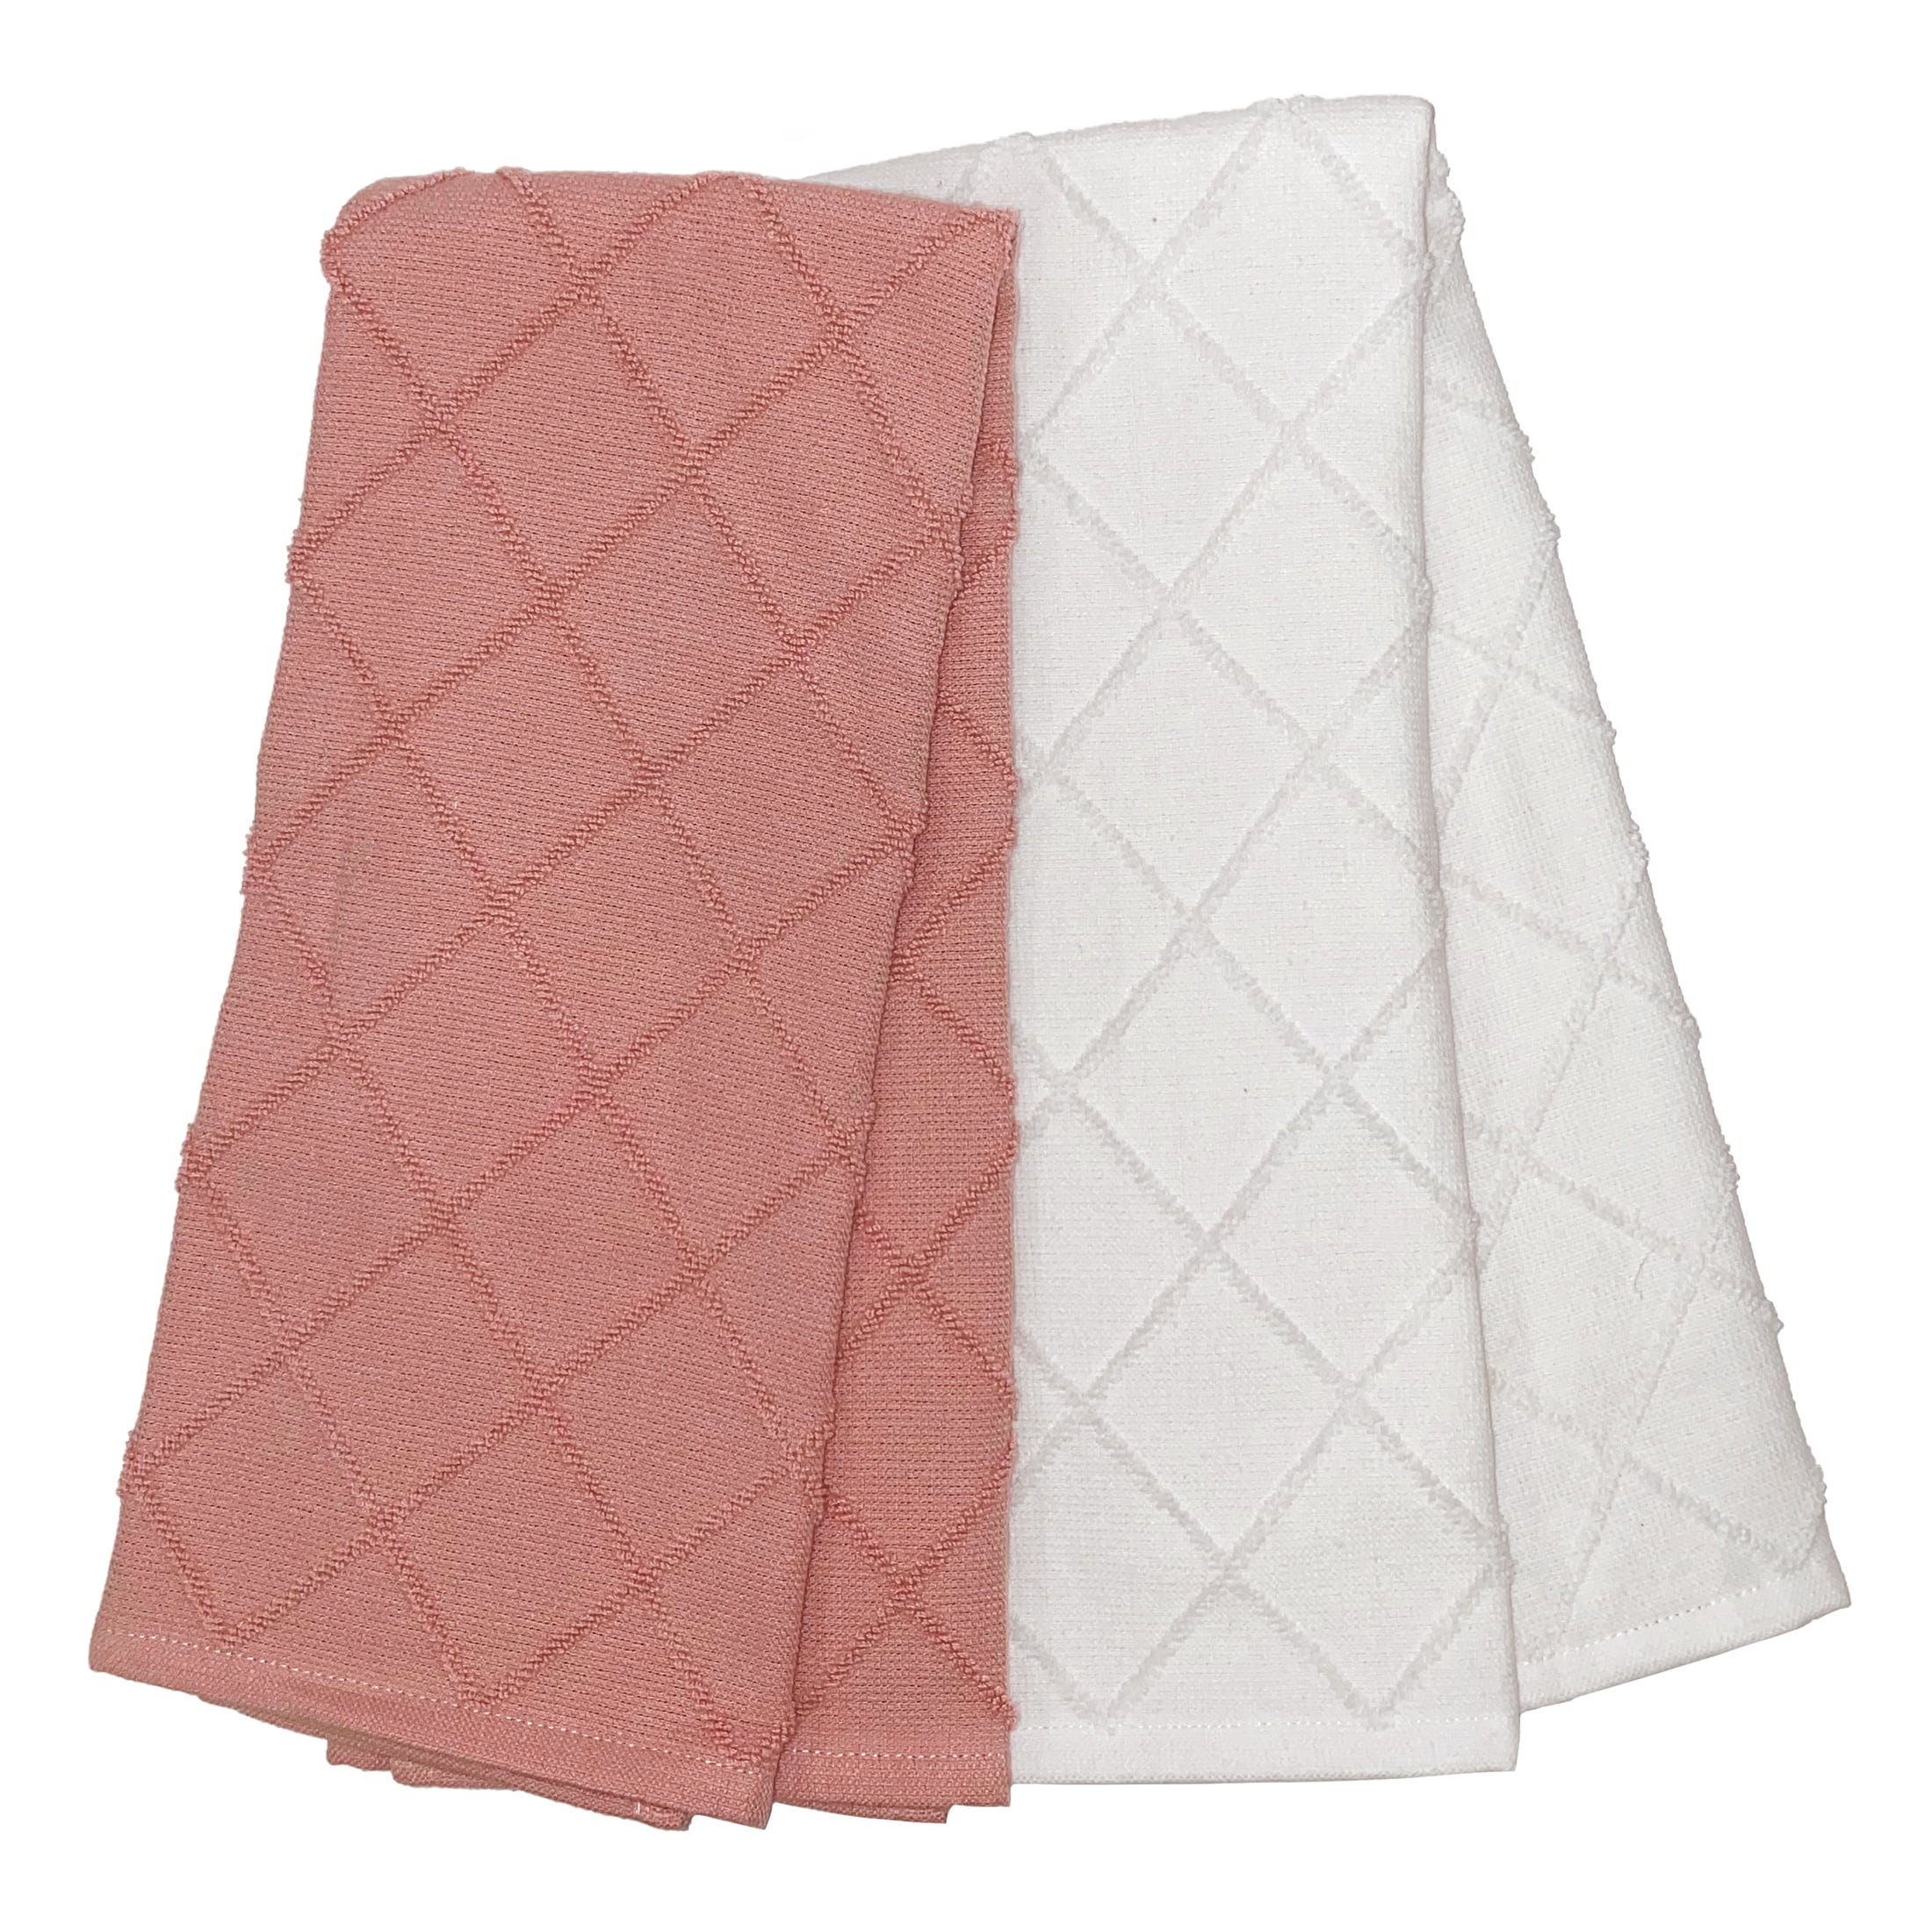 My Texas House Diamond Cotton Terry Kitchen Towels - Pink - 16 x 28 in